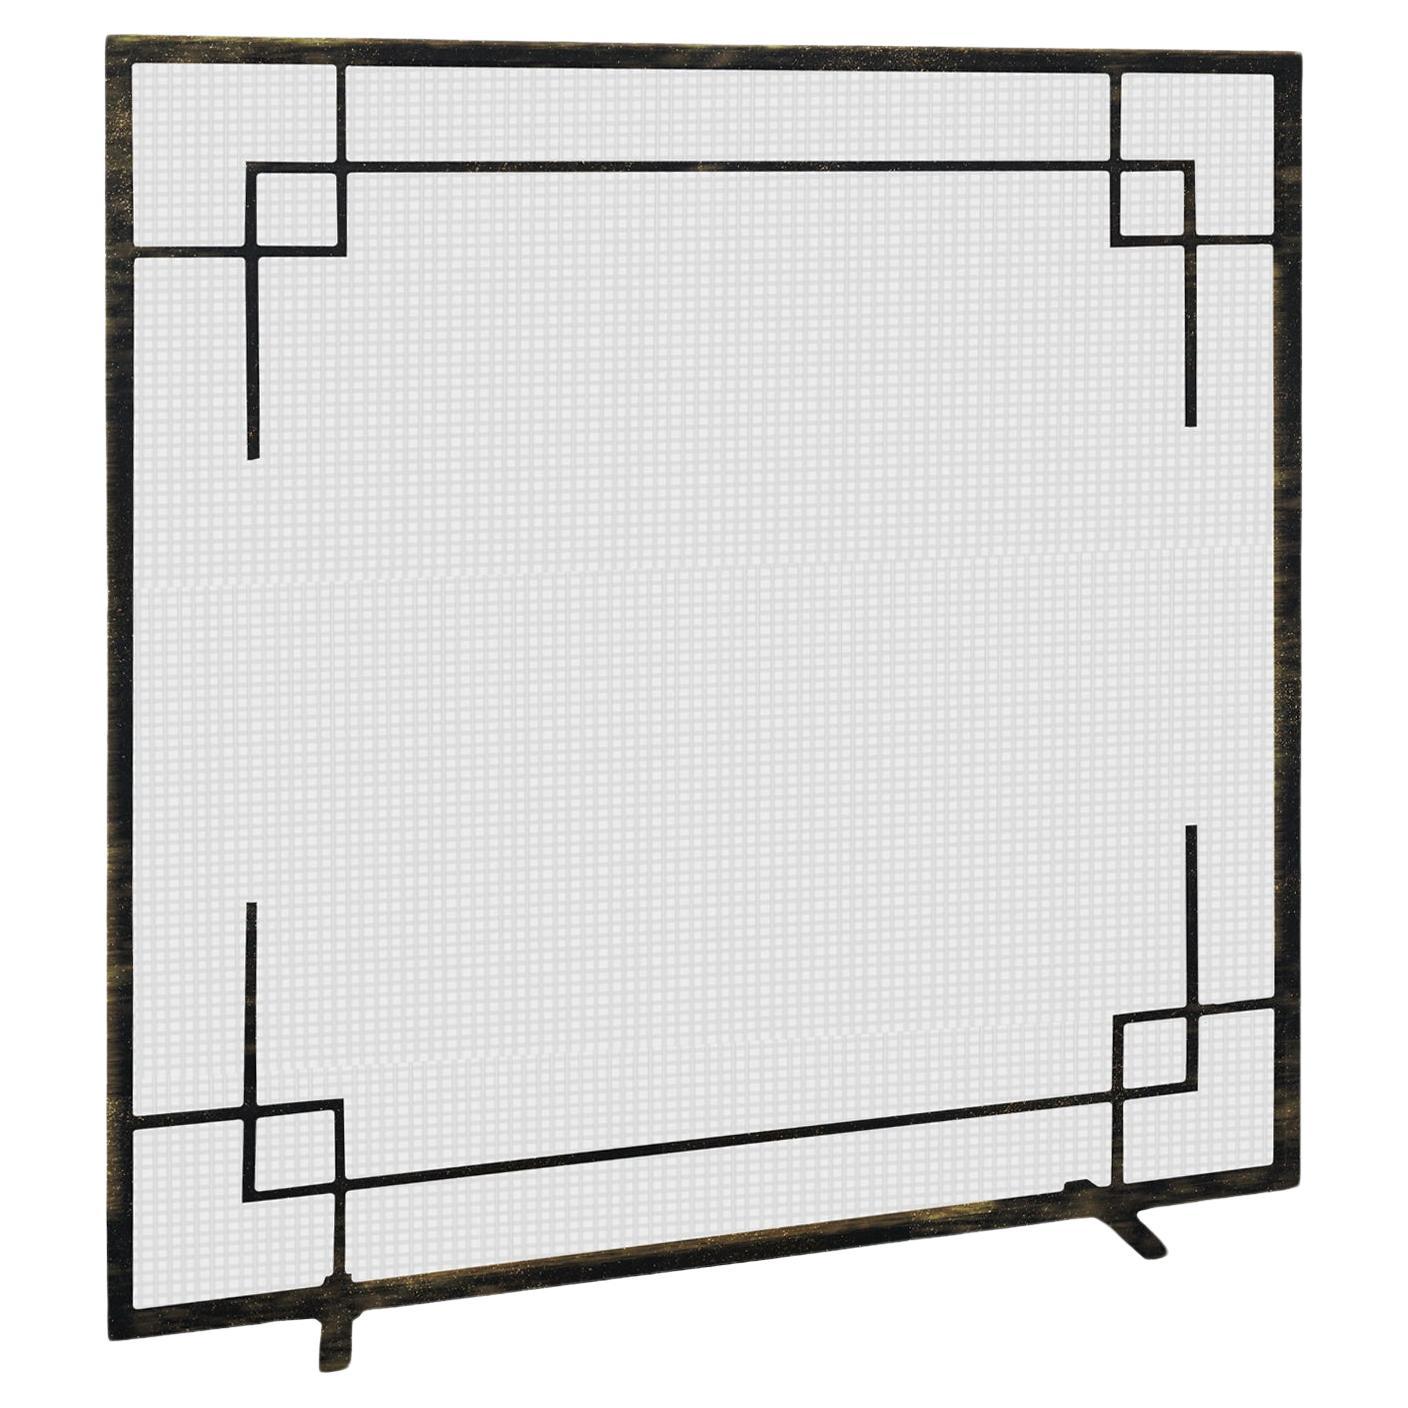 Evelynne Fireplace Screen in a Gold Rubbed Black Finish, Ready to Ship